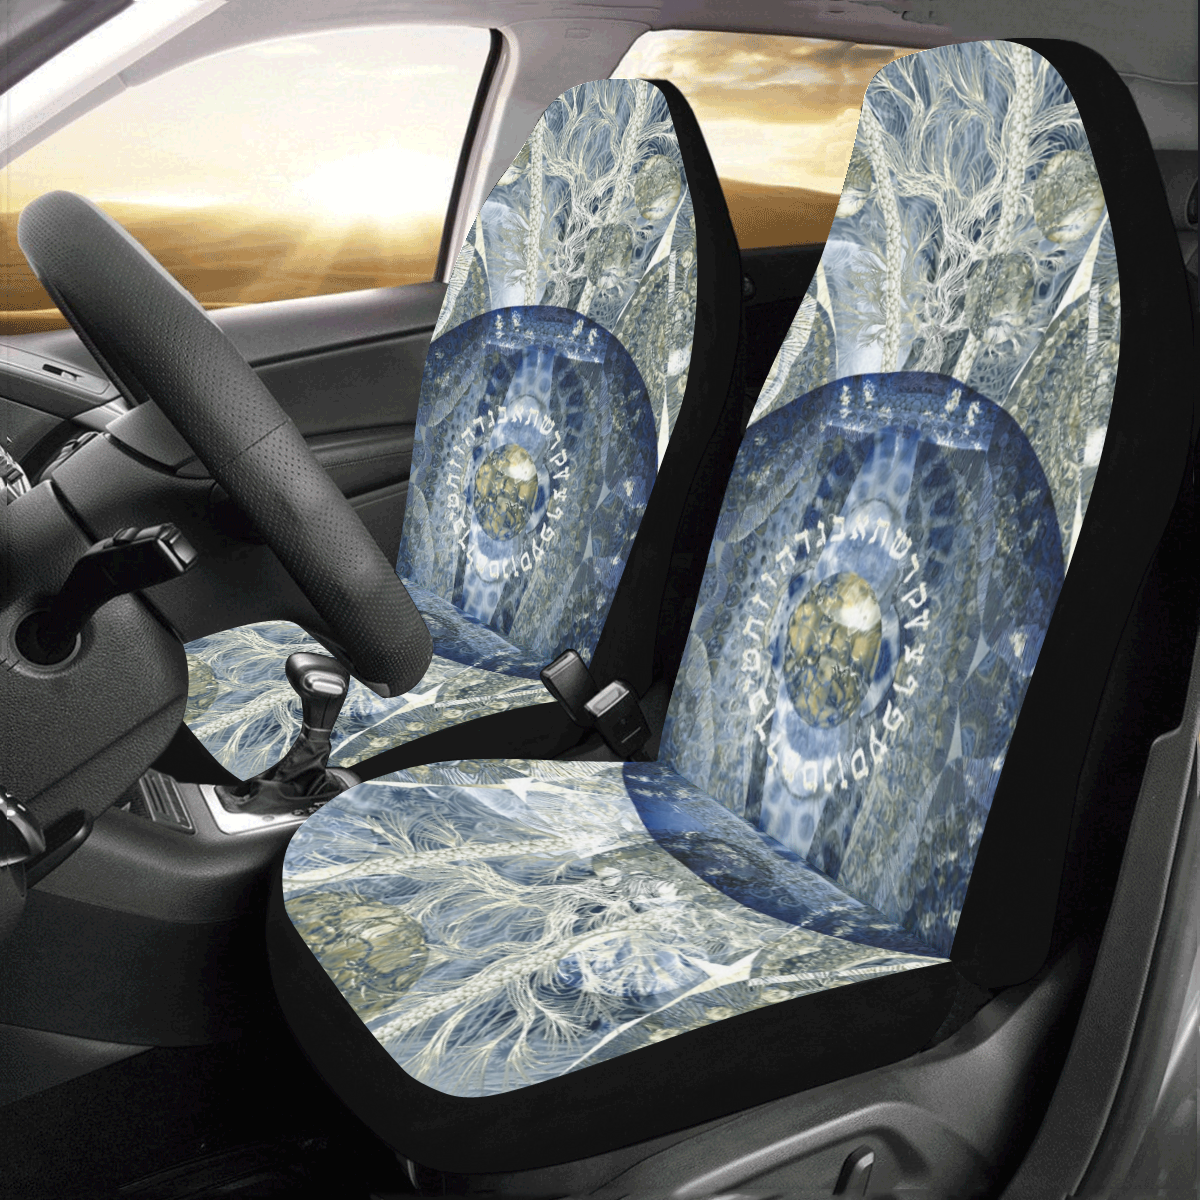 the tree of life dark blue gray gold Car Seat Covers (Set of 2)